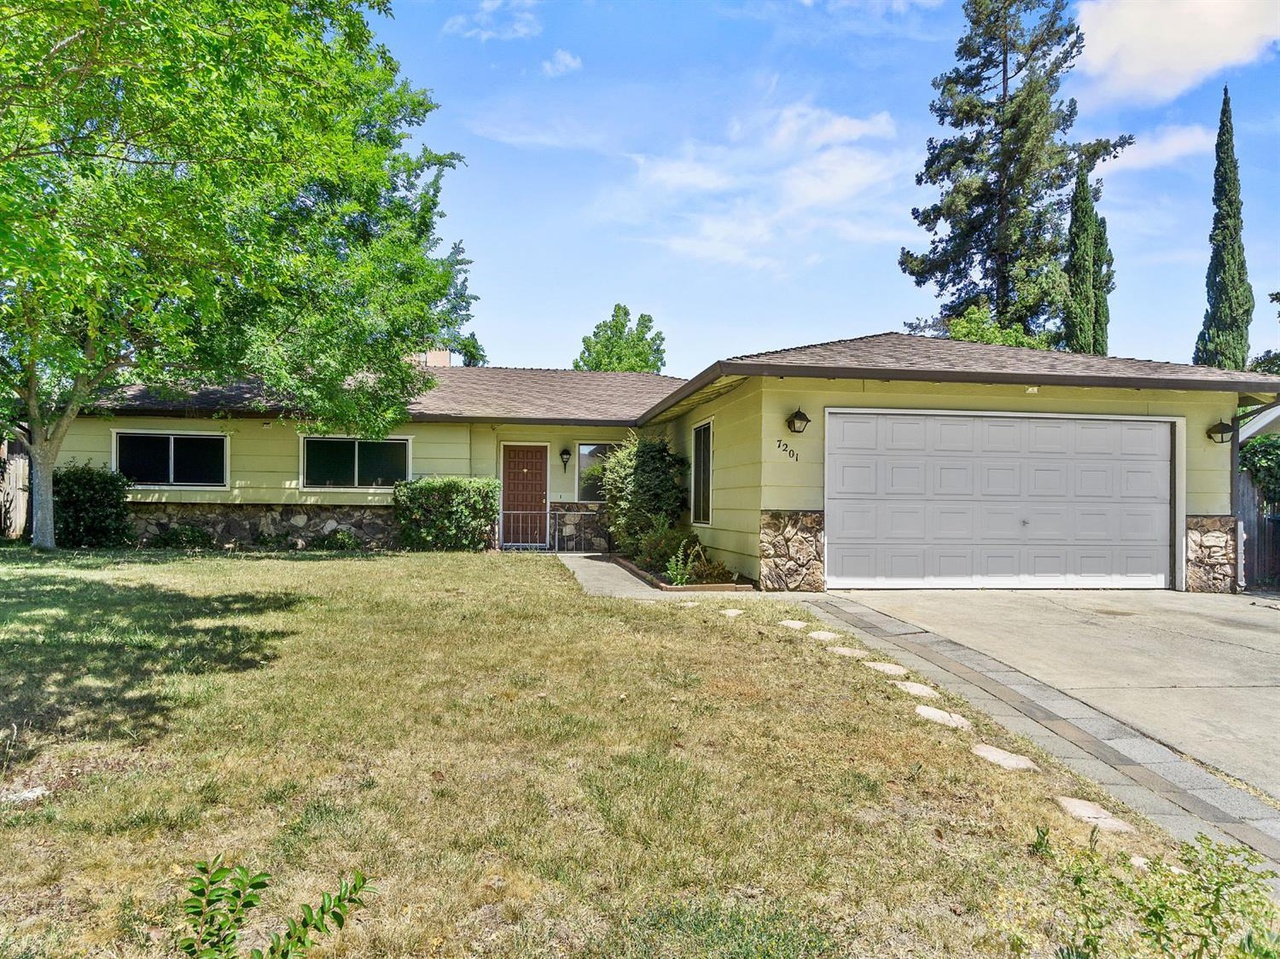 7201 Spicer Dr, Citrus Heights, CA 95621 | MLS# 221059458 | Redfin